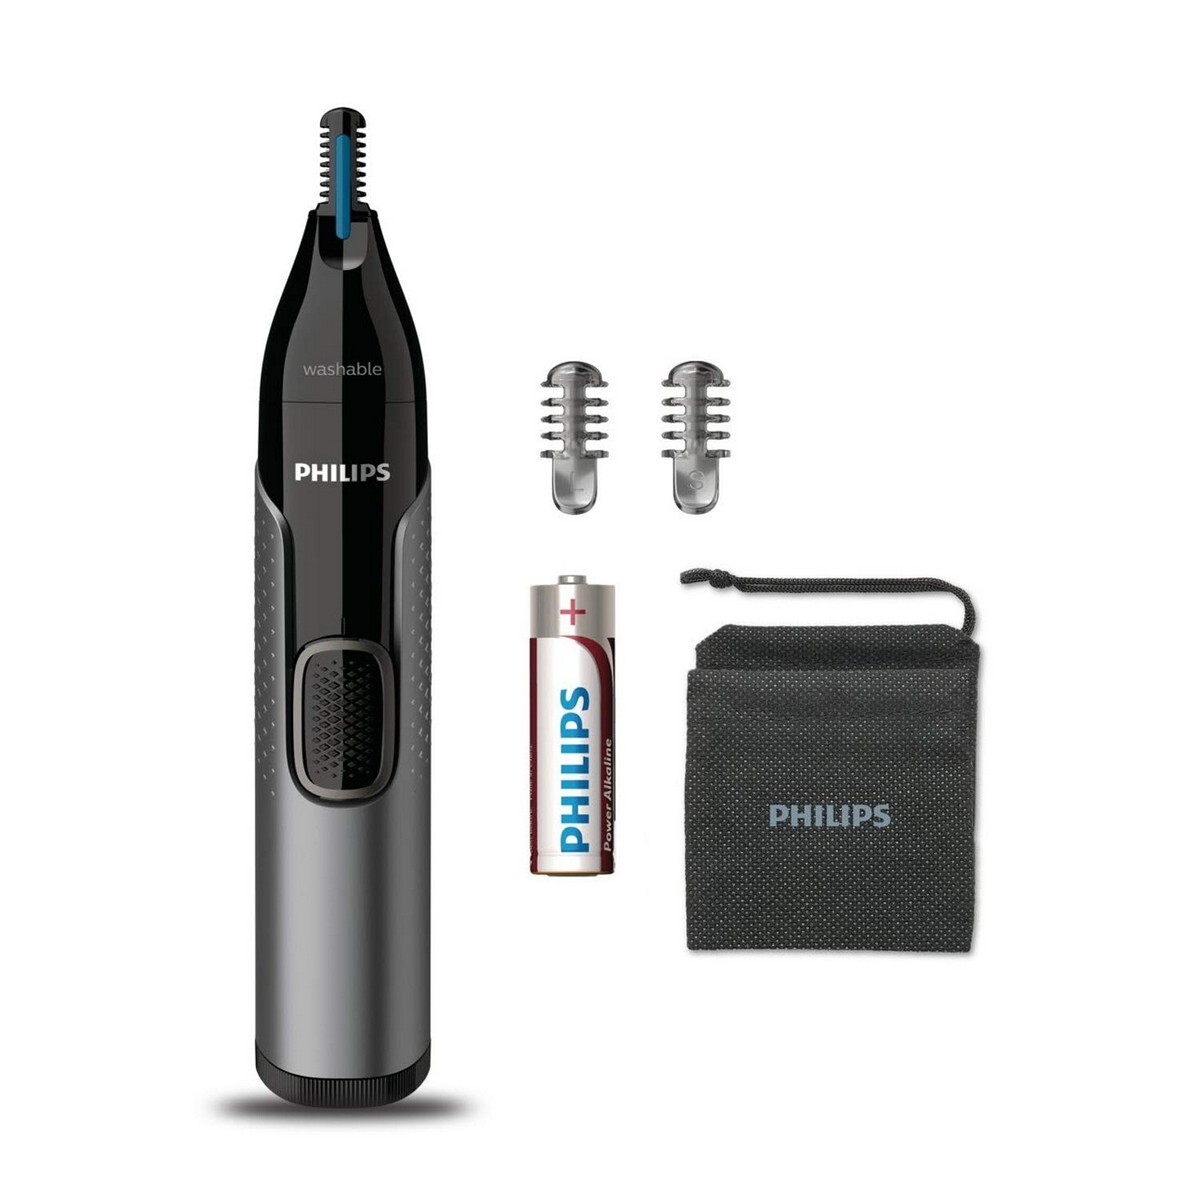 Philips Nose Trimmer NT3650/16